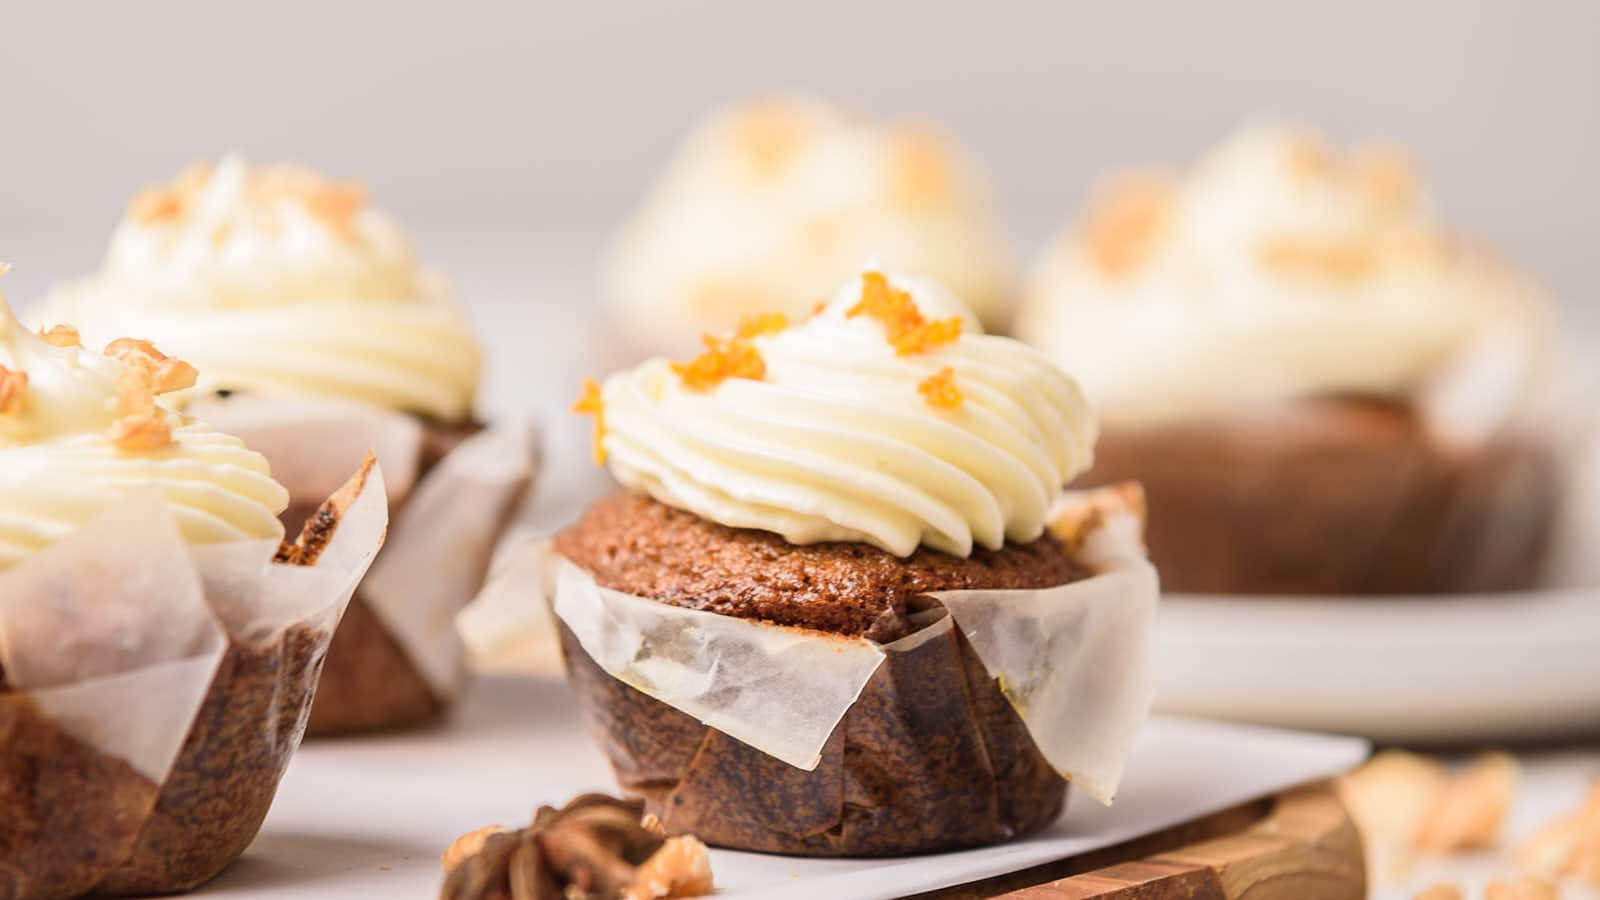 Carrot Cake Cupcake recipe by Cheerful Cook.